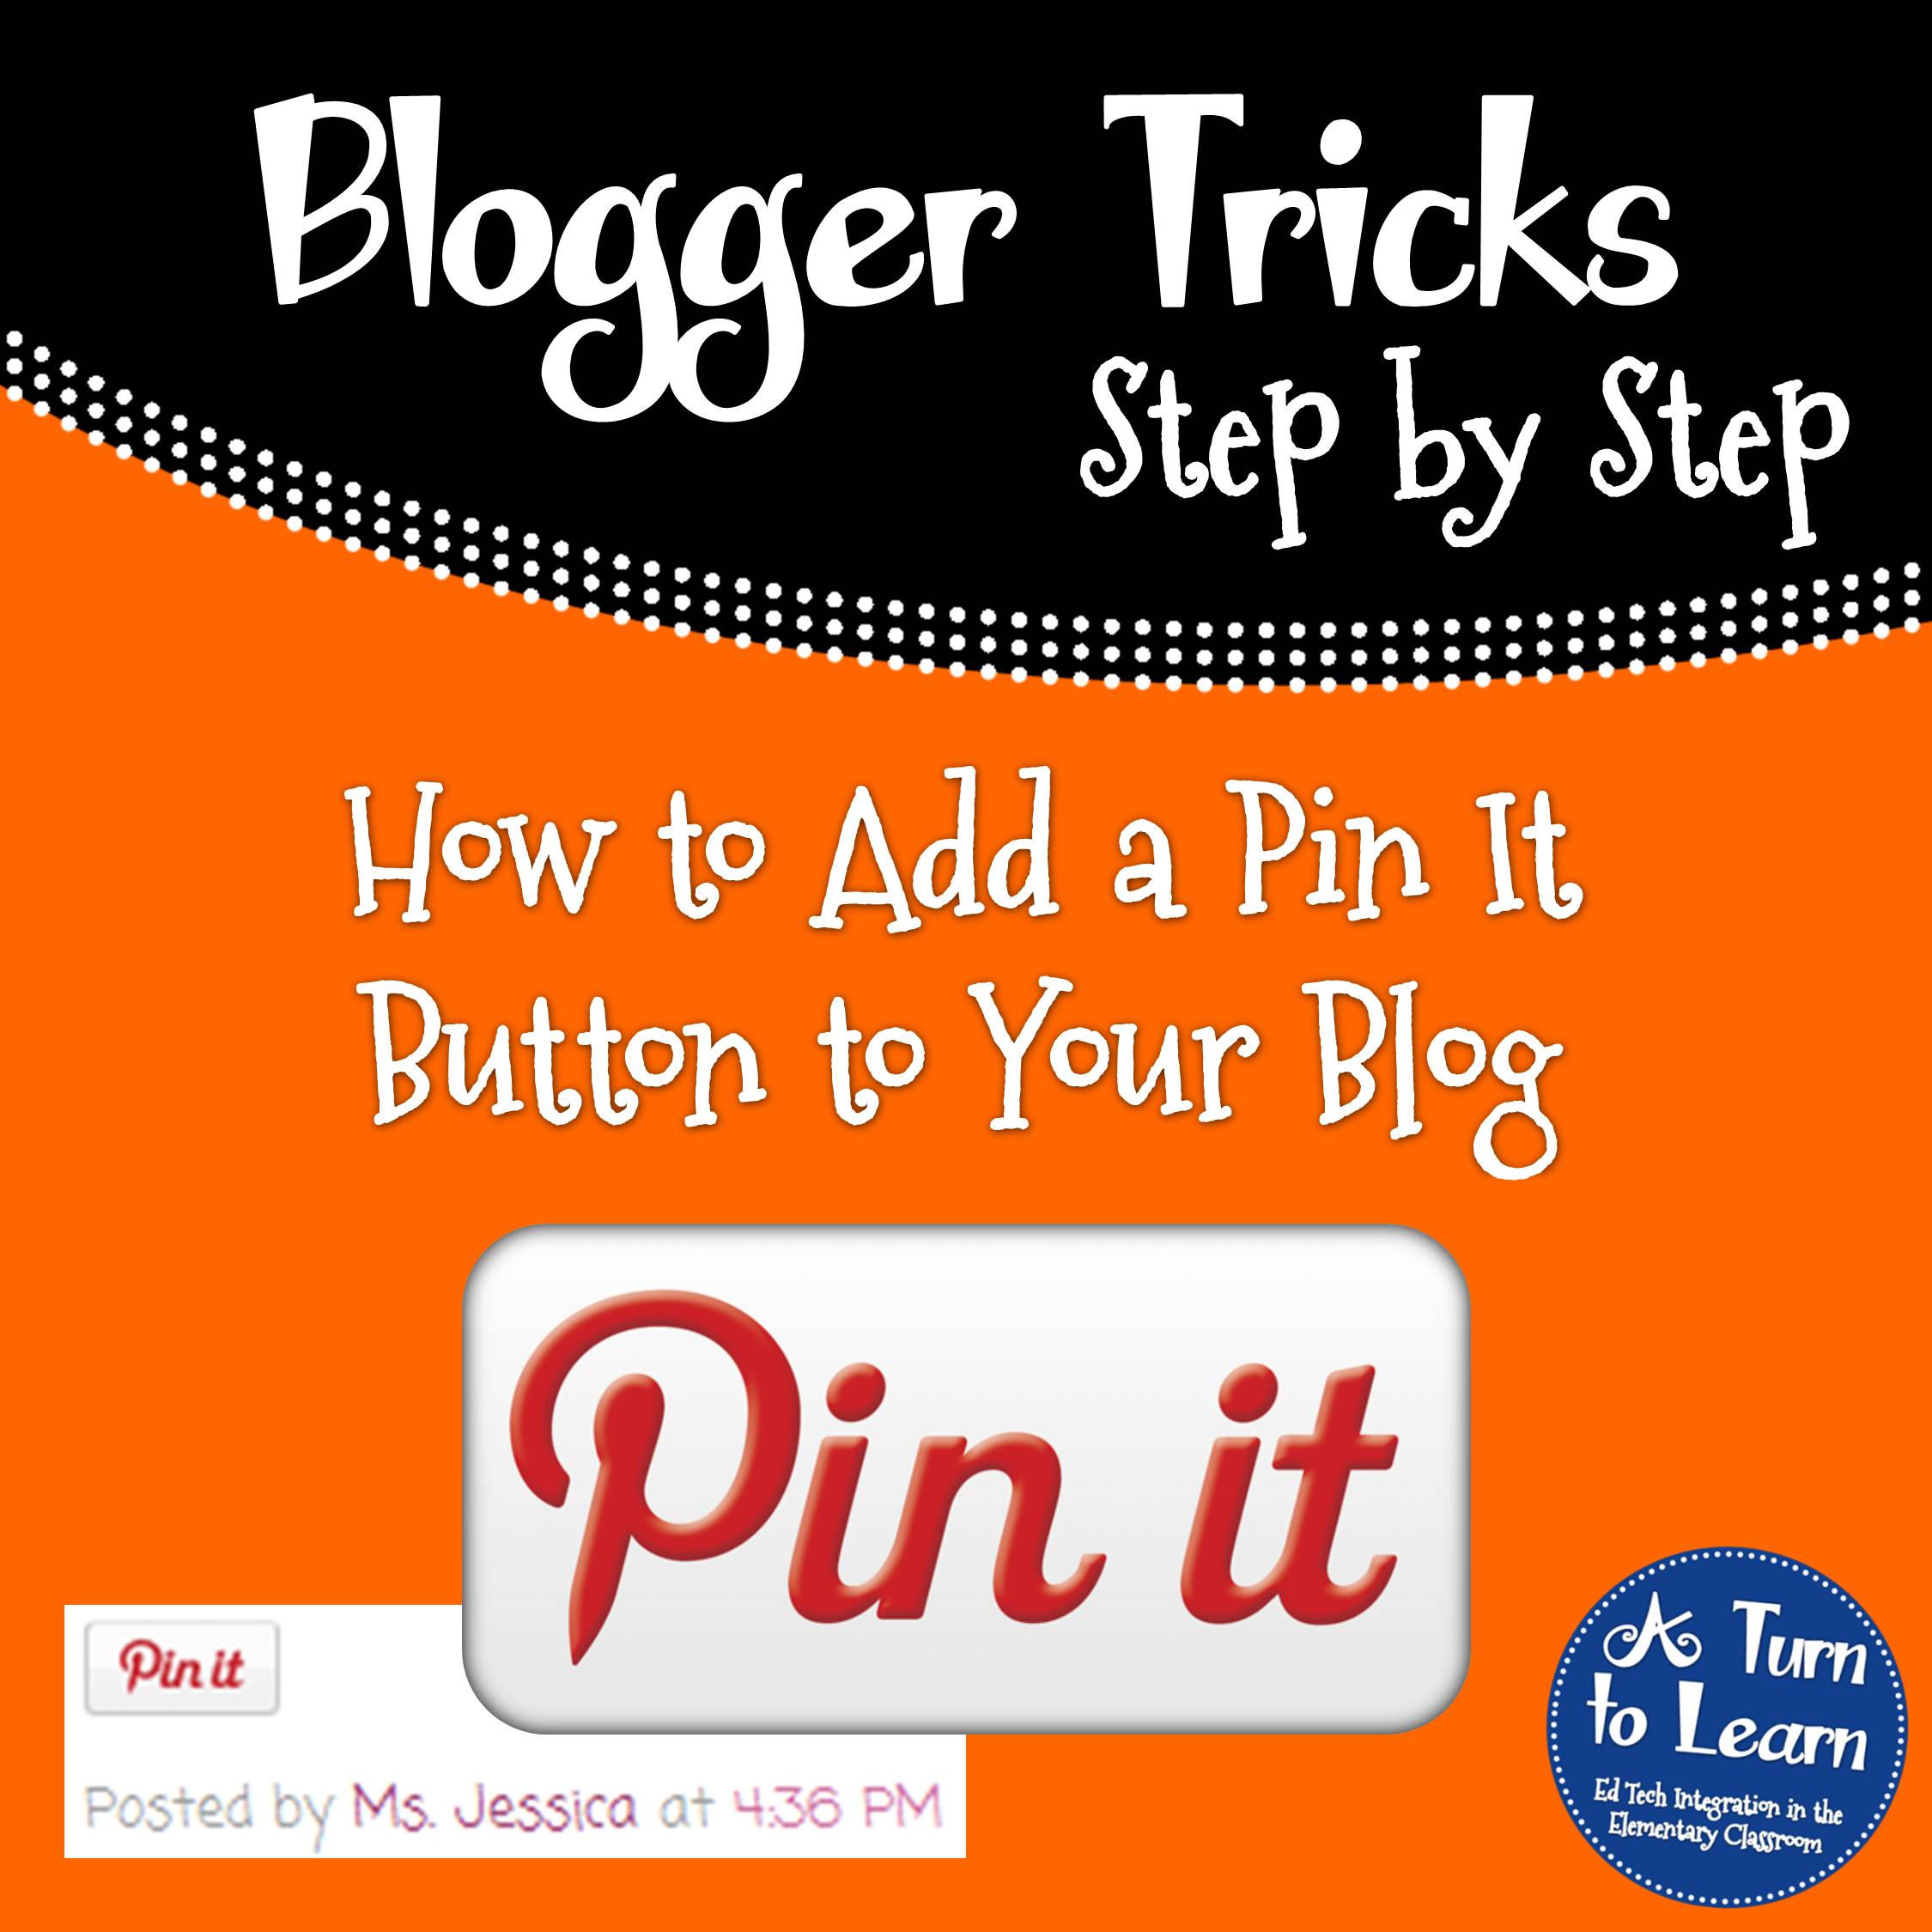 How to Add a Pin It Button to Your Blog